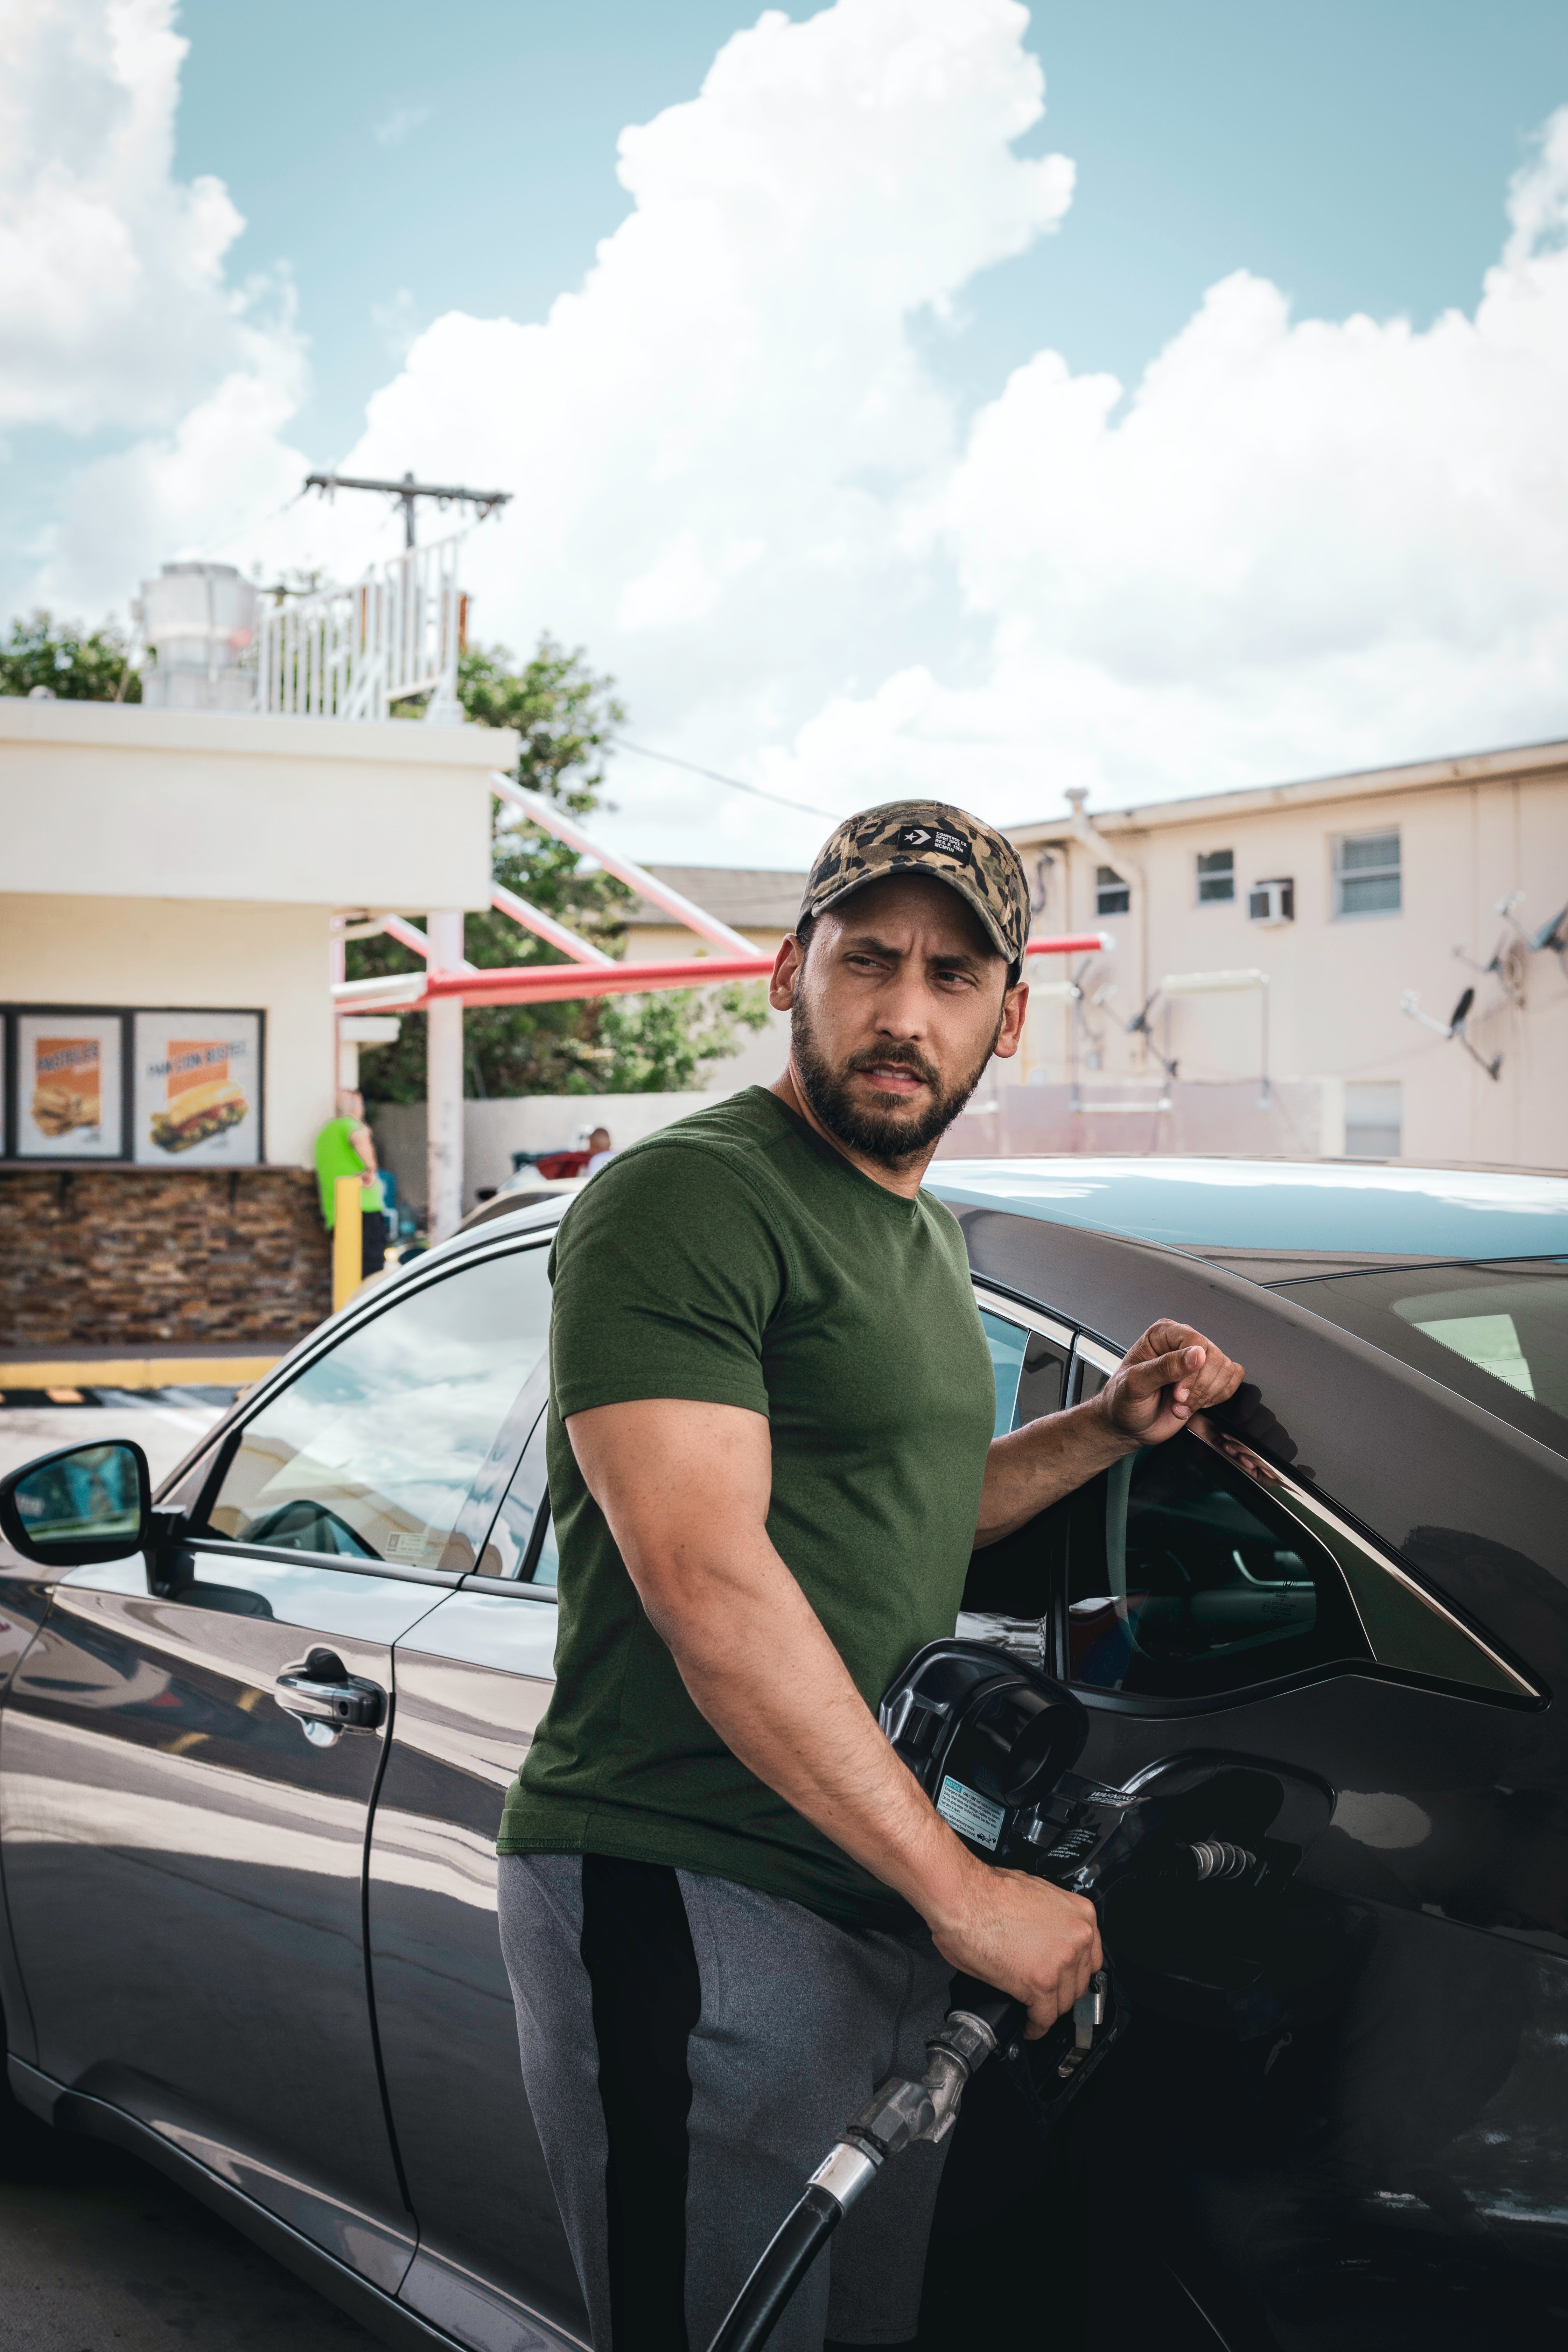 A man fills up his car with fuel at a gas station | Pexels/One Shot